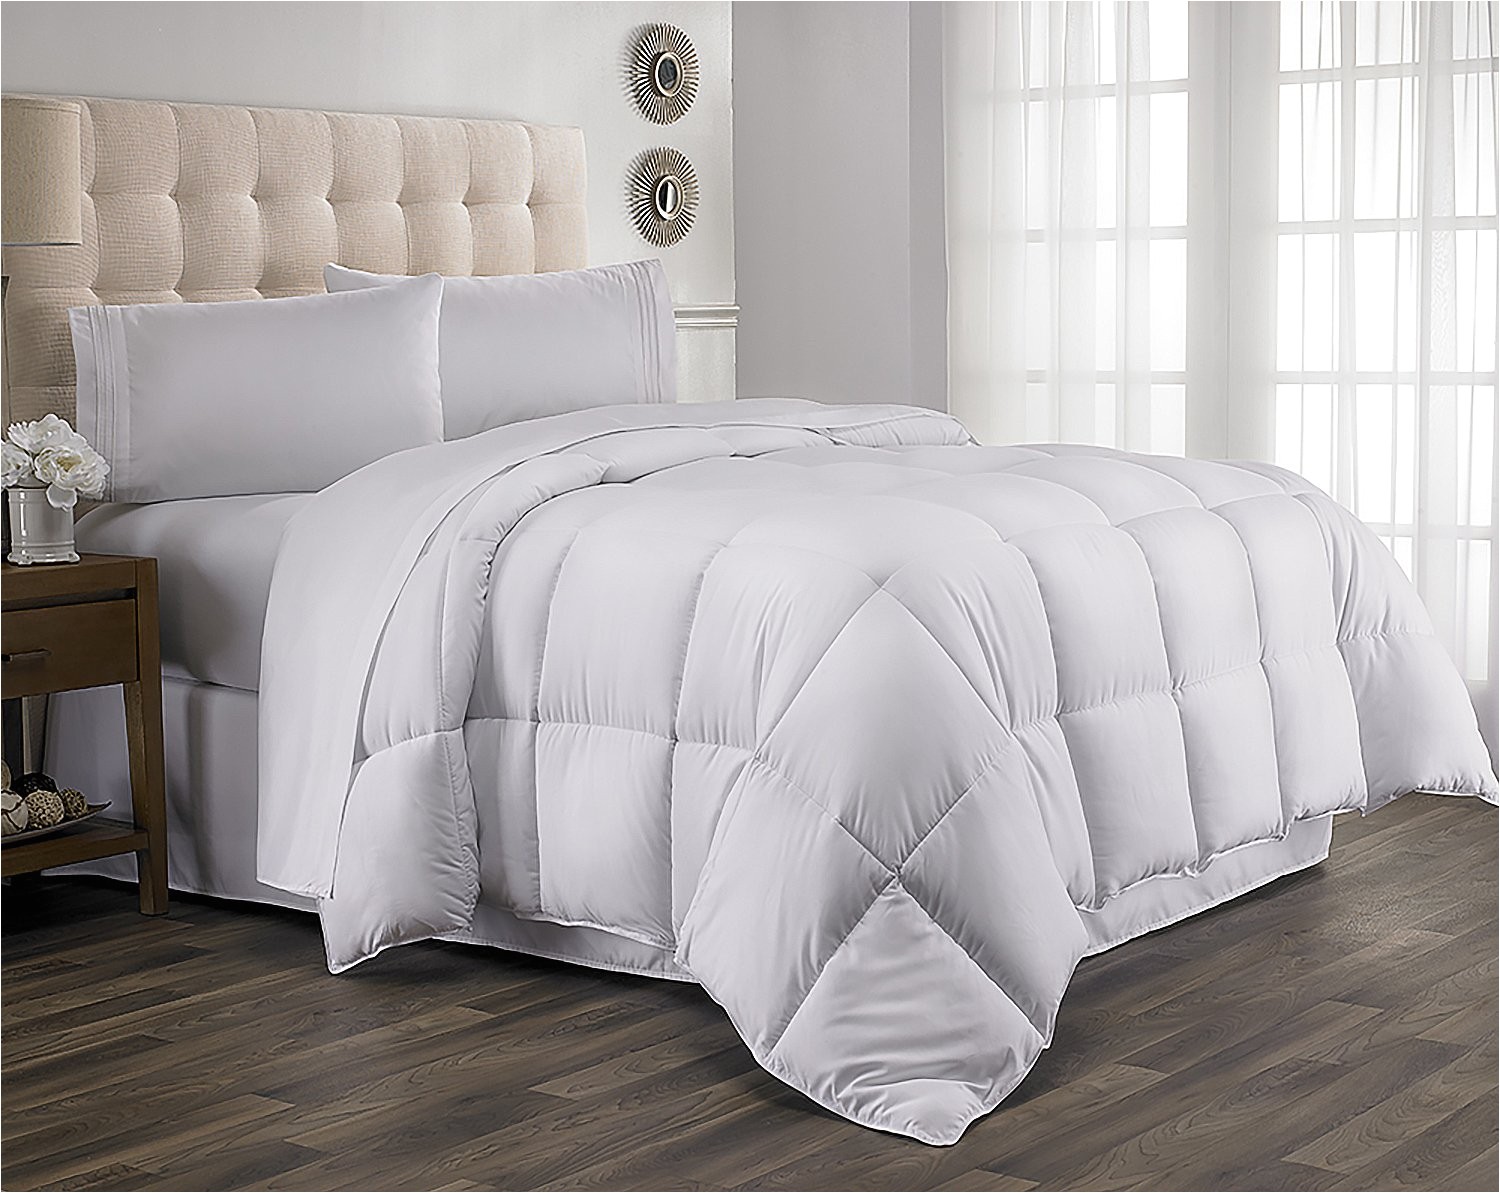 Top Rated Comforters Down Alternative Best Rated In Bedding Duvets Down Comforters Helpful